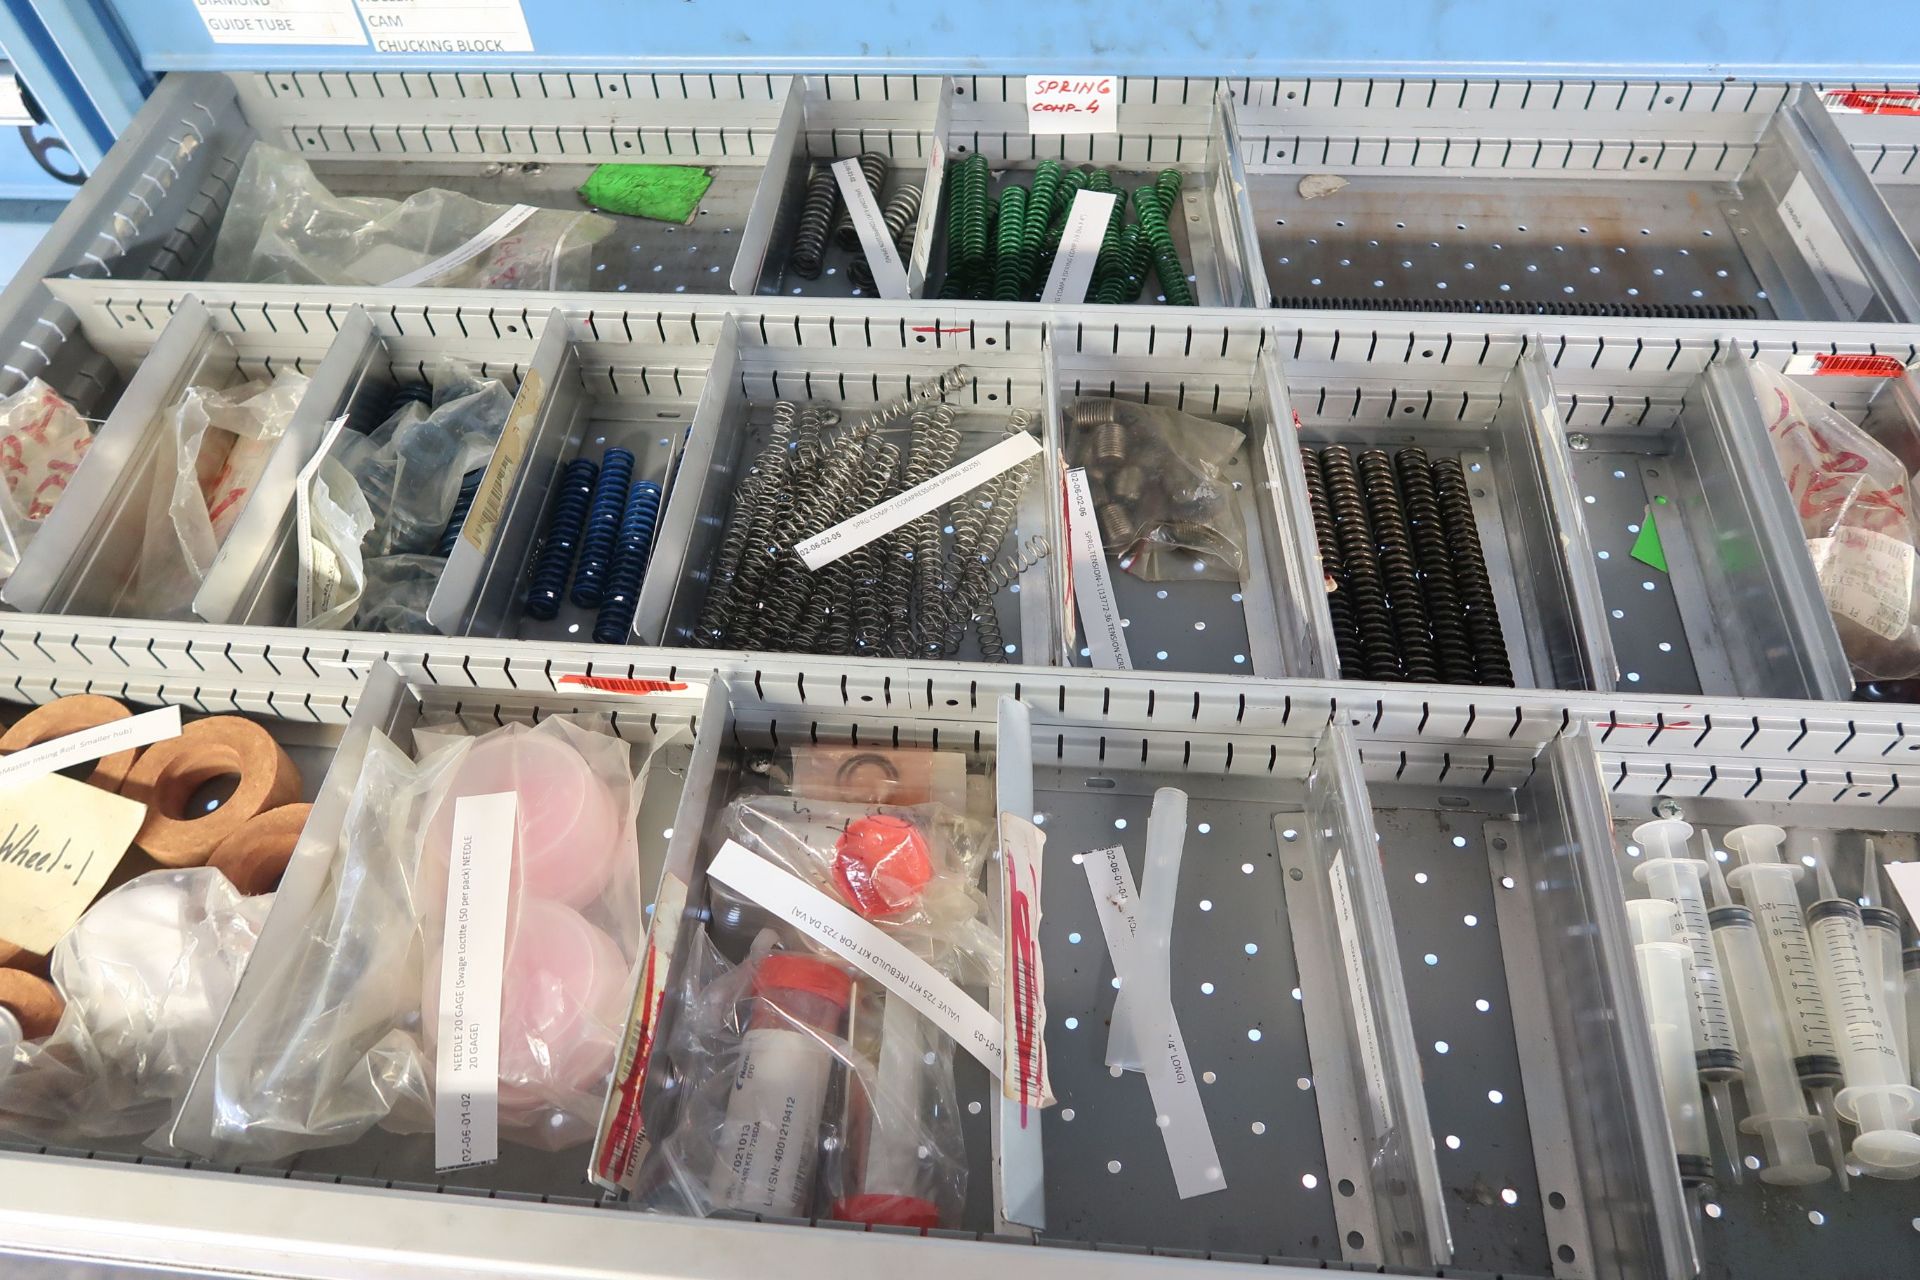 11-DRAWER LISTA CABINET WITH CONTENTS HARDWARE, CAMS, GEARS, TOOLING, COLLETS, PUMPS - Image 6 of 13